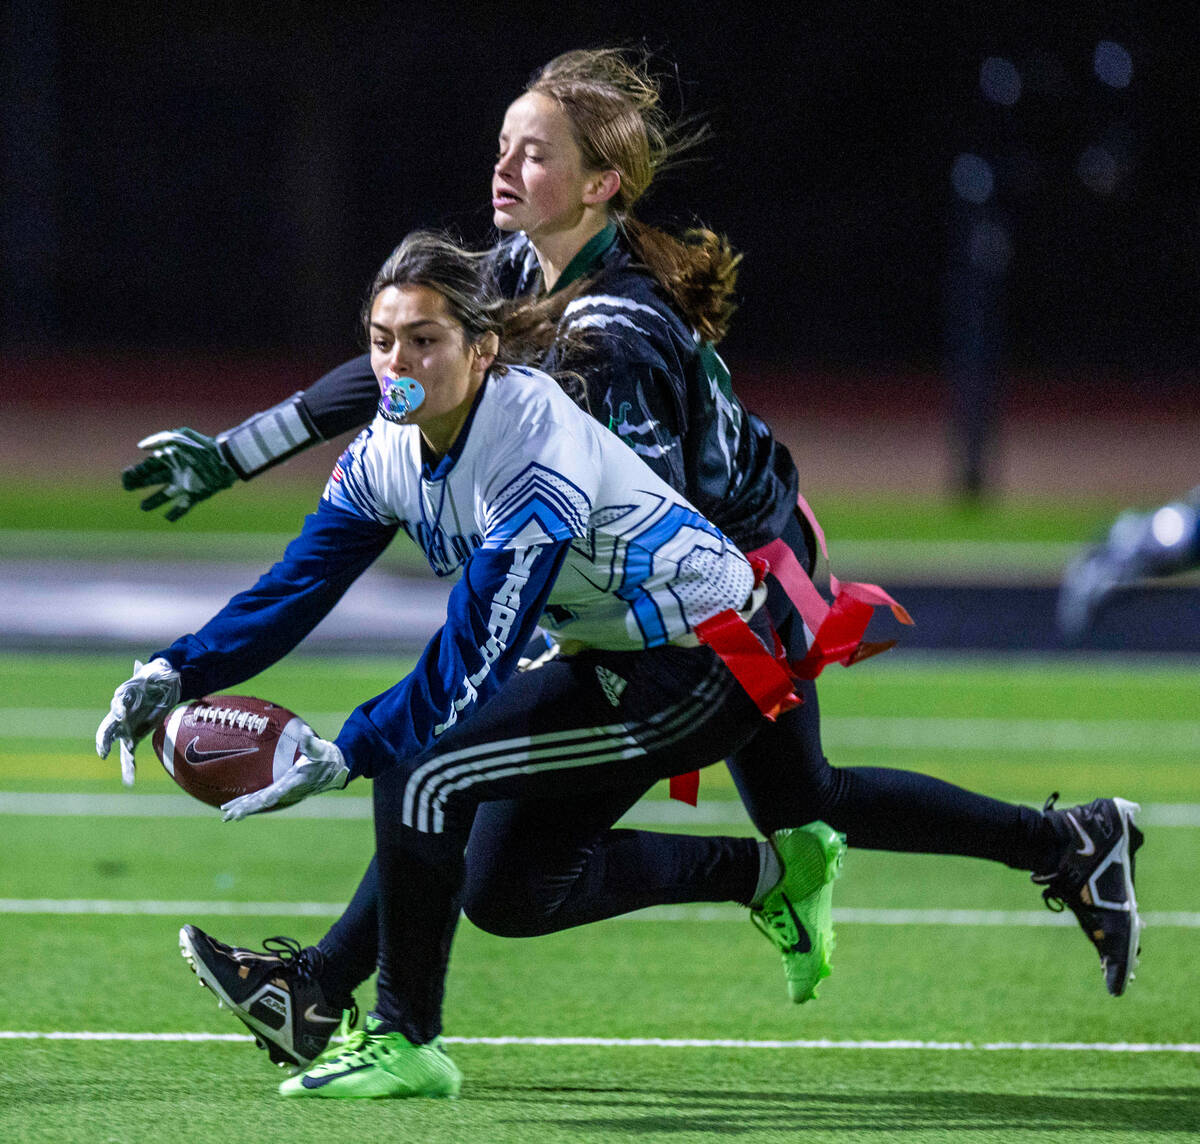 Centennial receiver Kaylynn DeFeo (4) attempts a catch with Palo Verde defender Alexis Manzo (1 ...